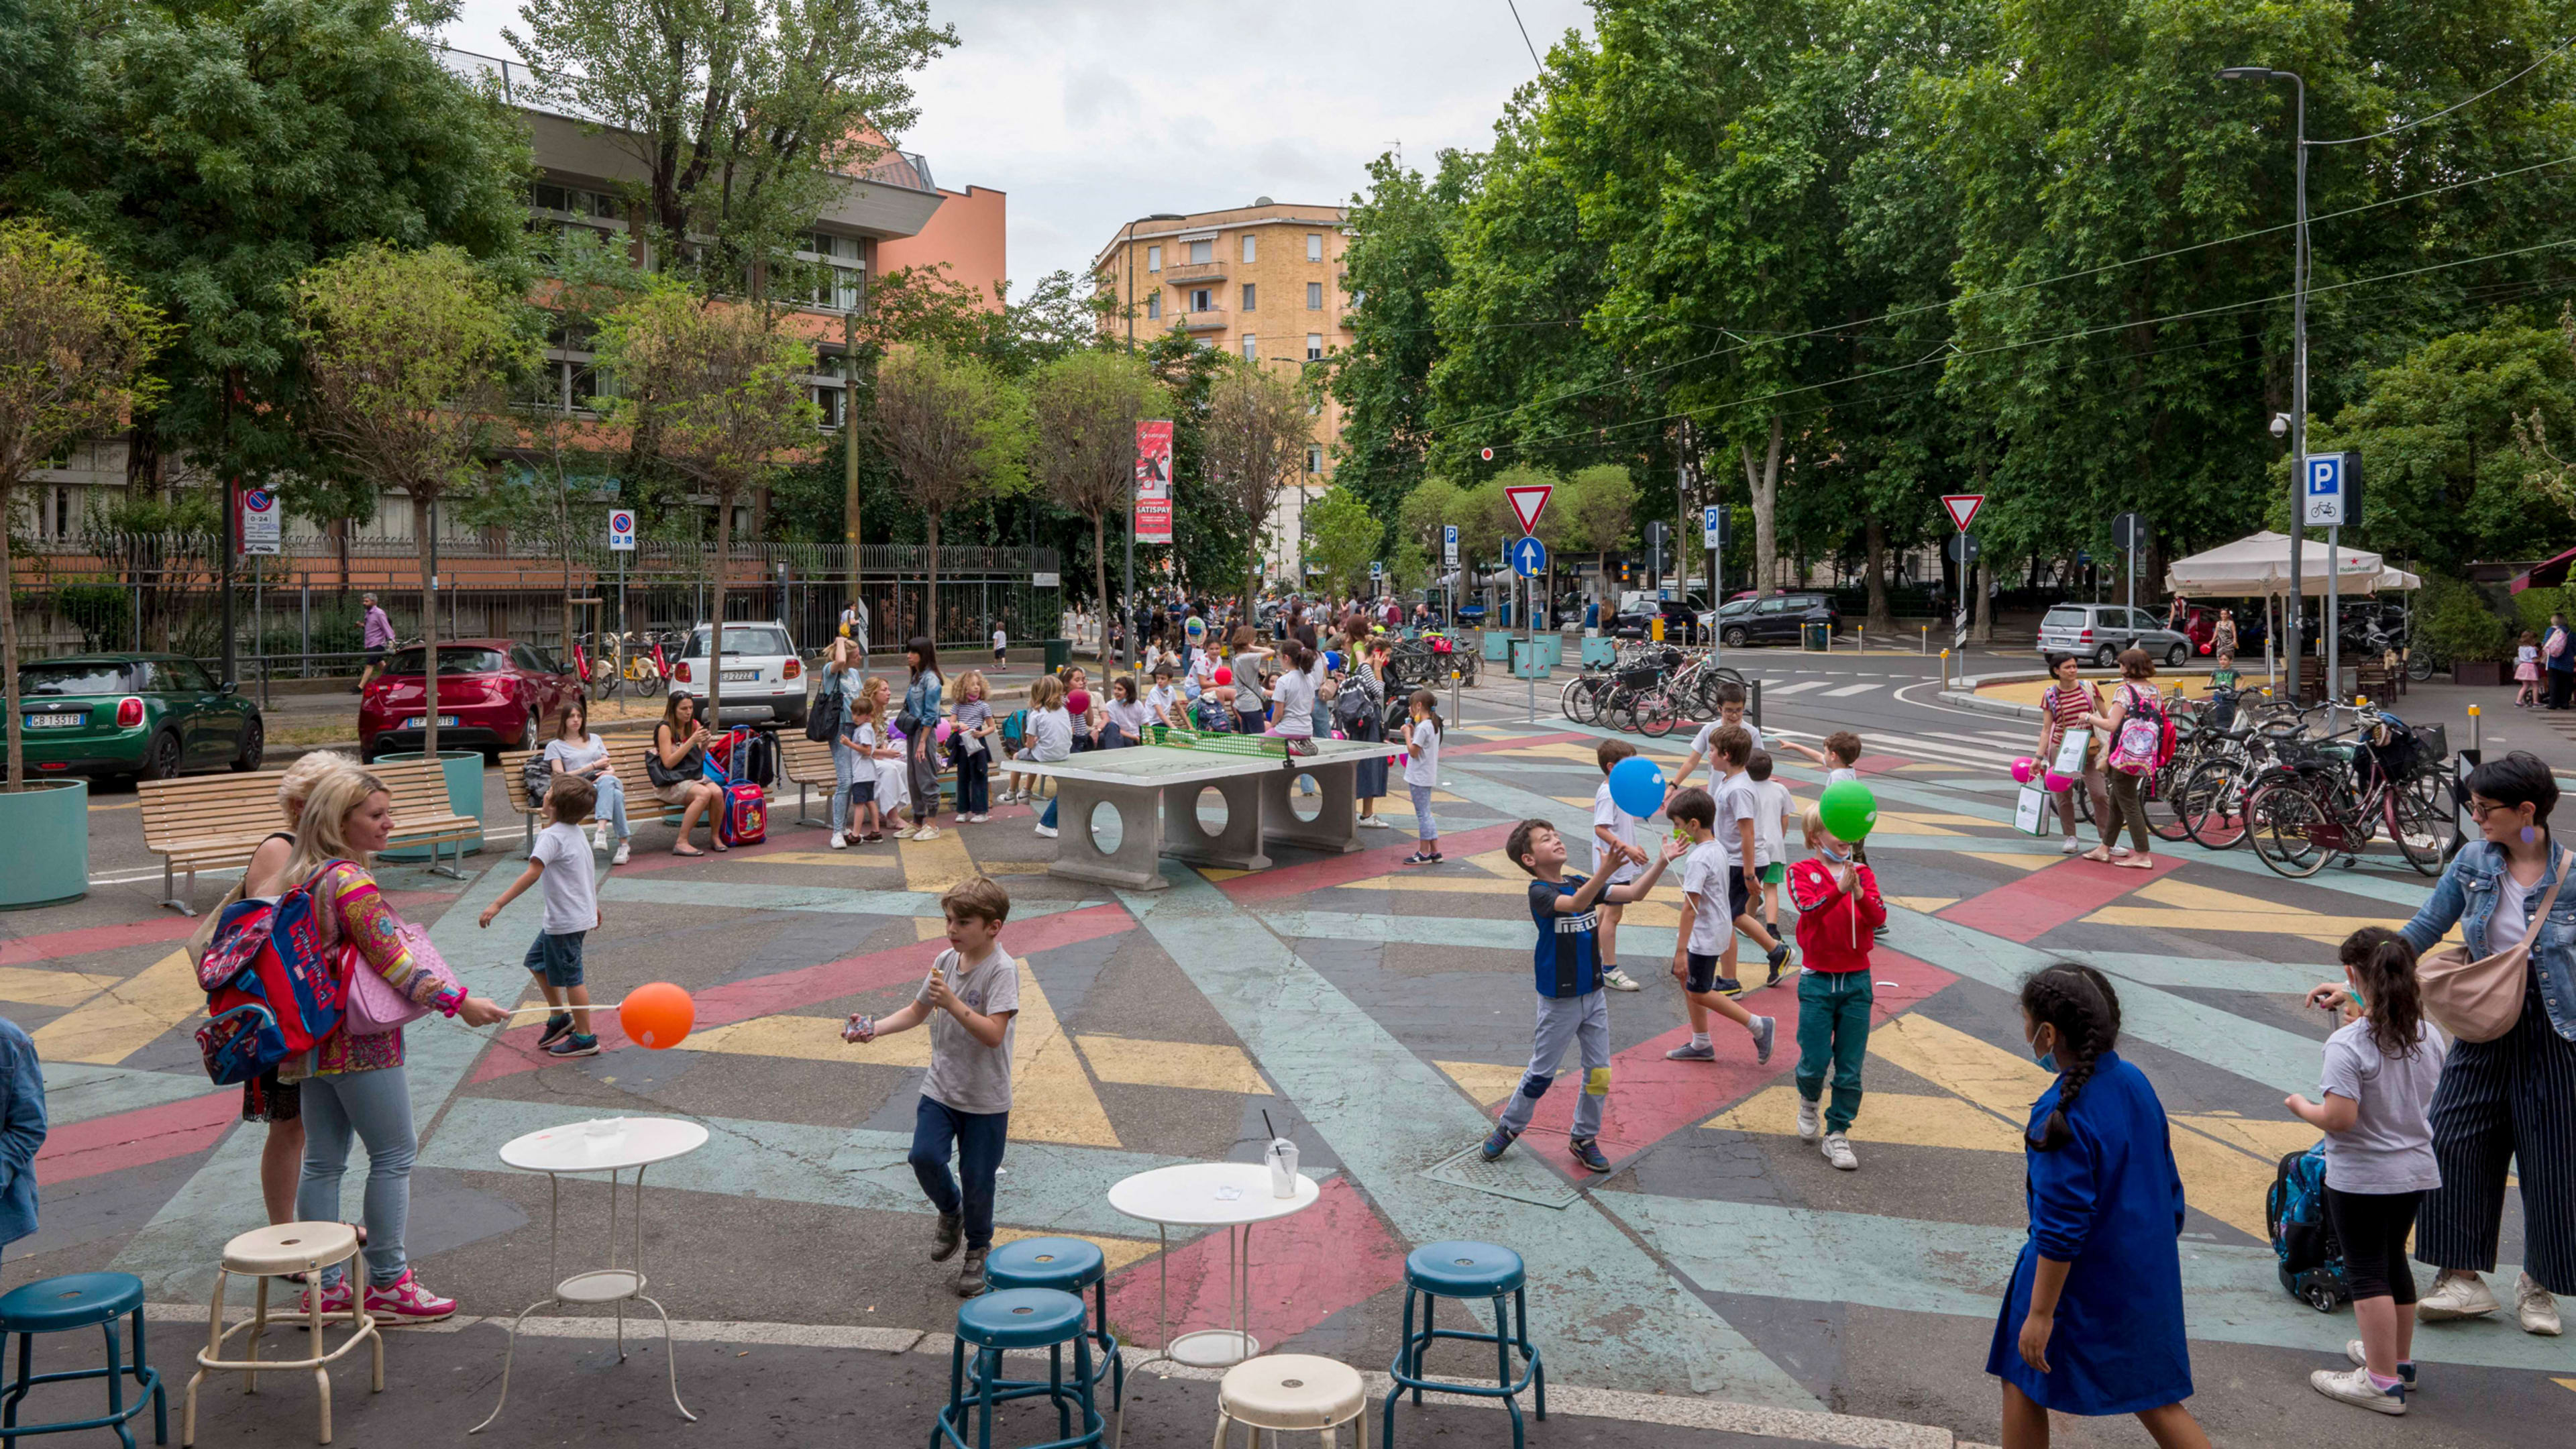 Milan turned 250,000 square feet of parking into public space